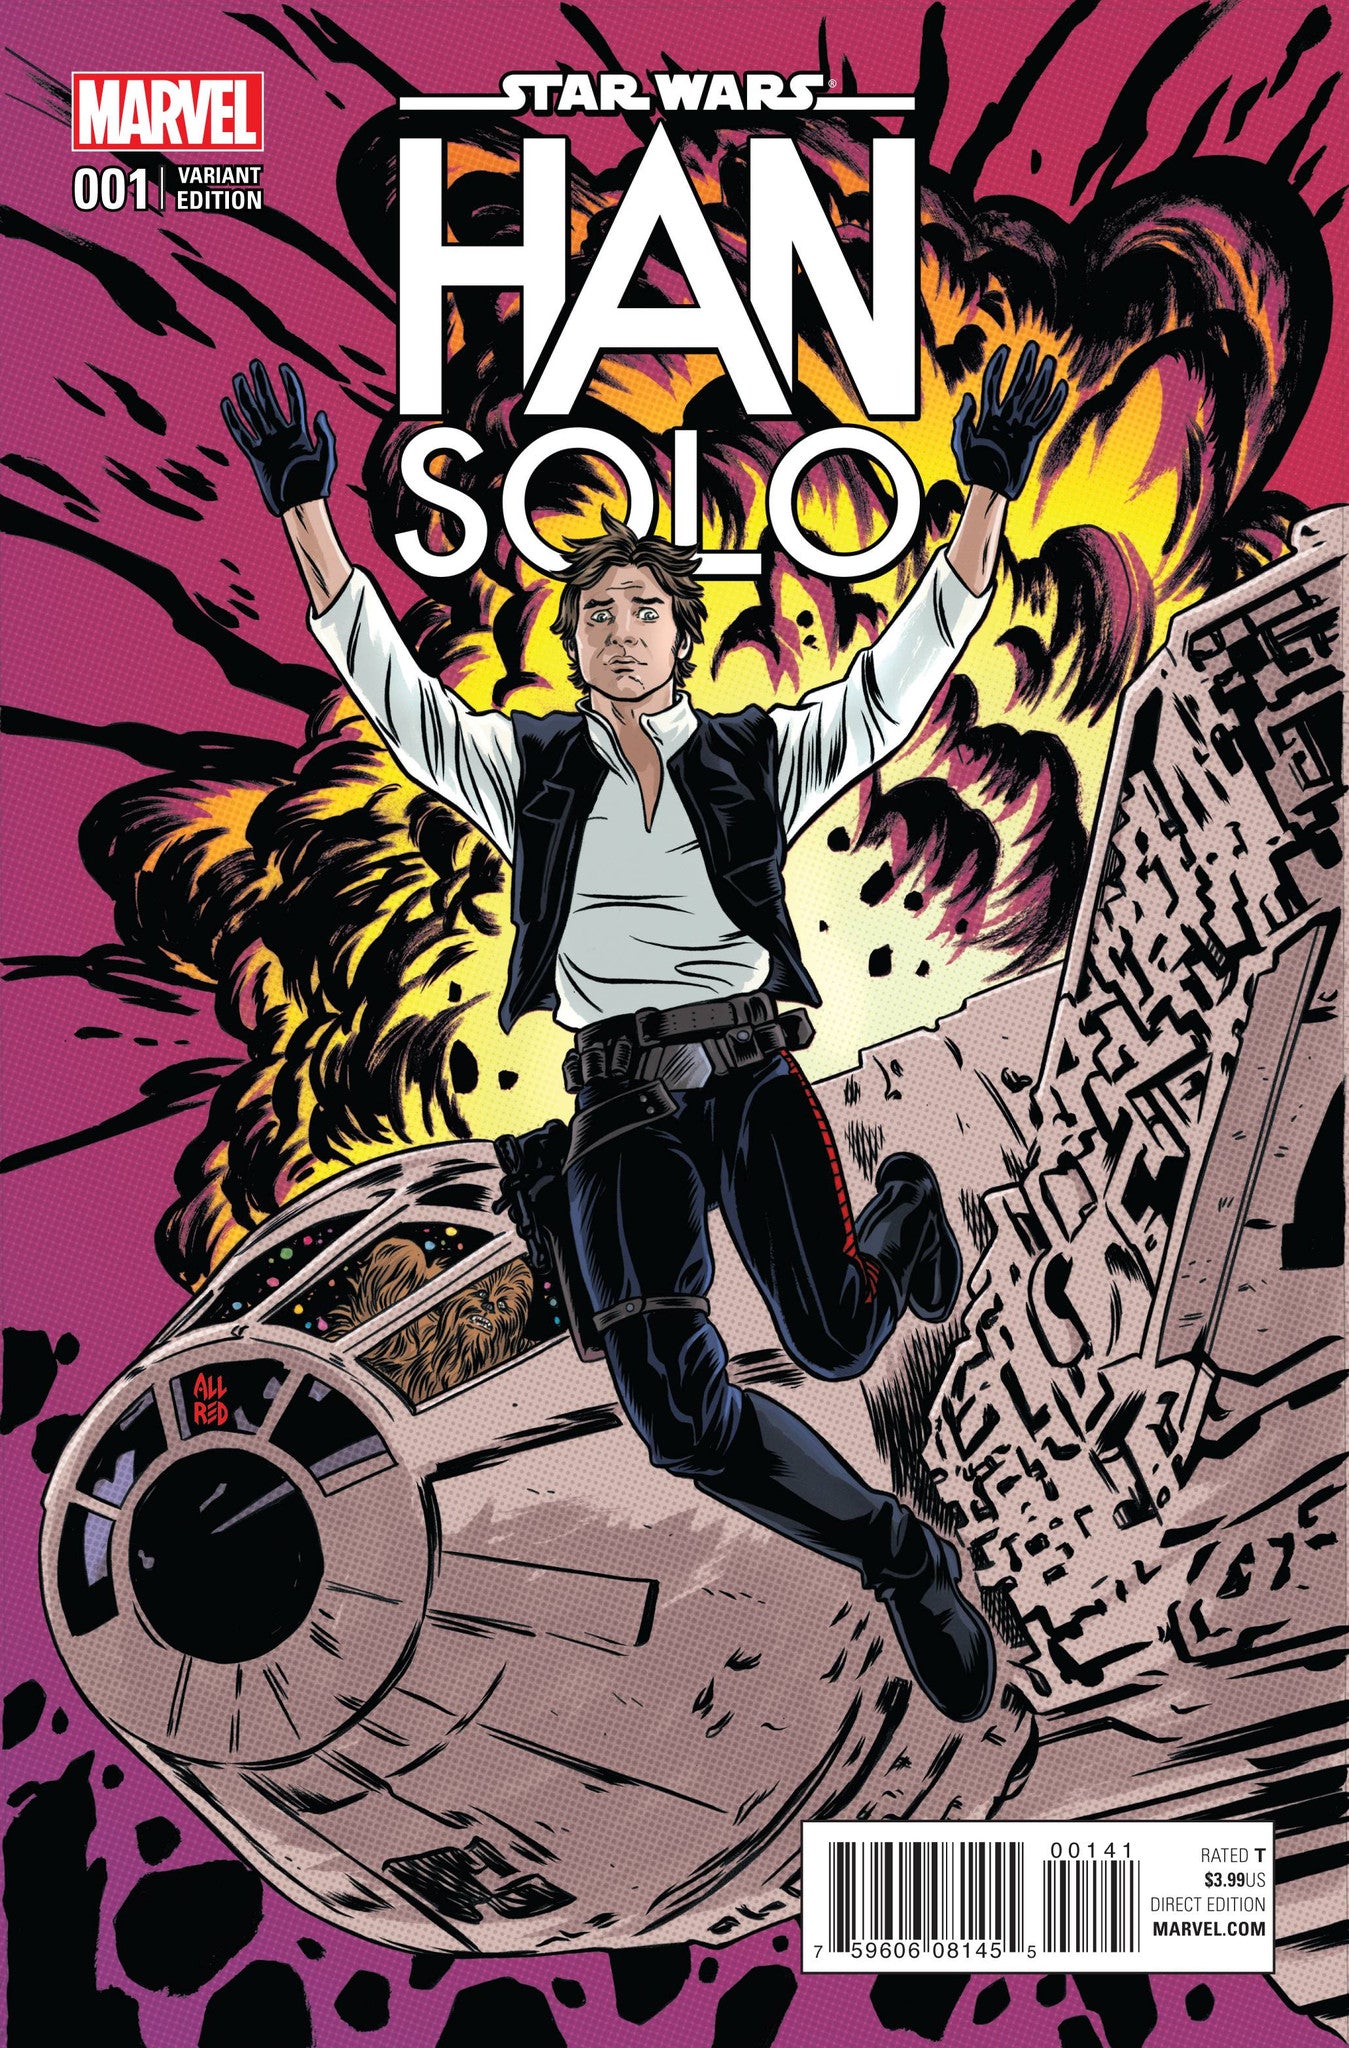 STAR WARS HAN SOLO #1 (OF 5) ALLRED VARIANT COVER